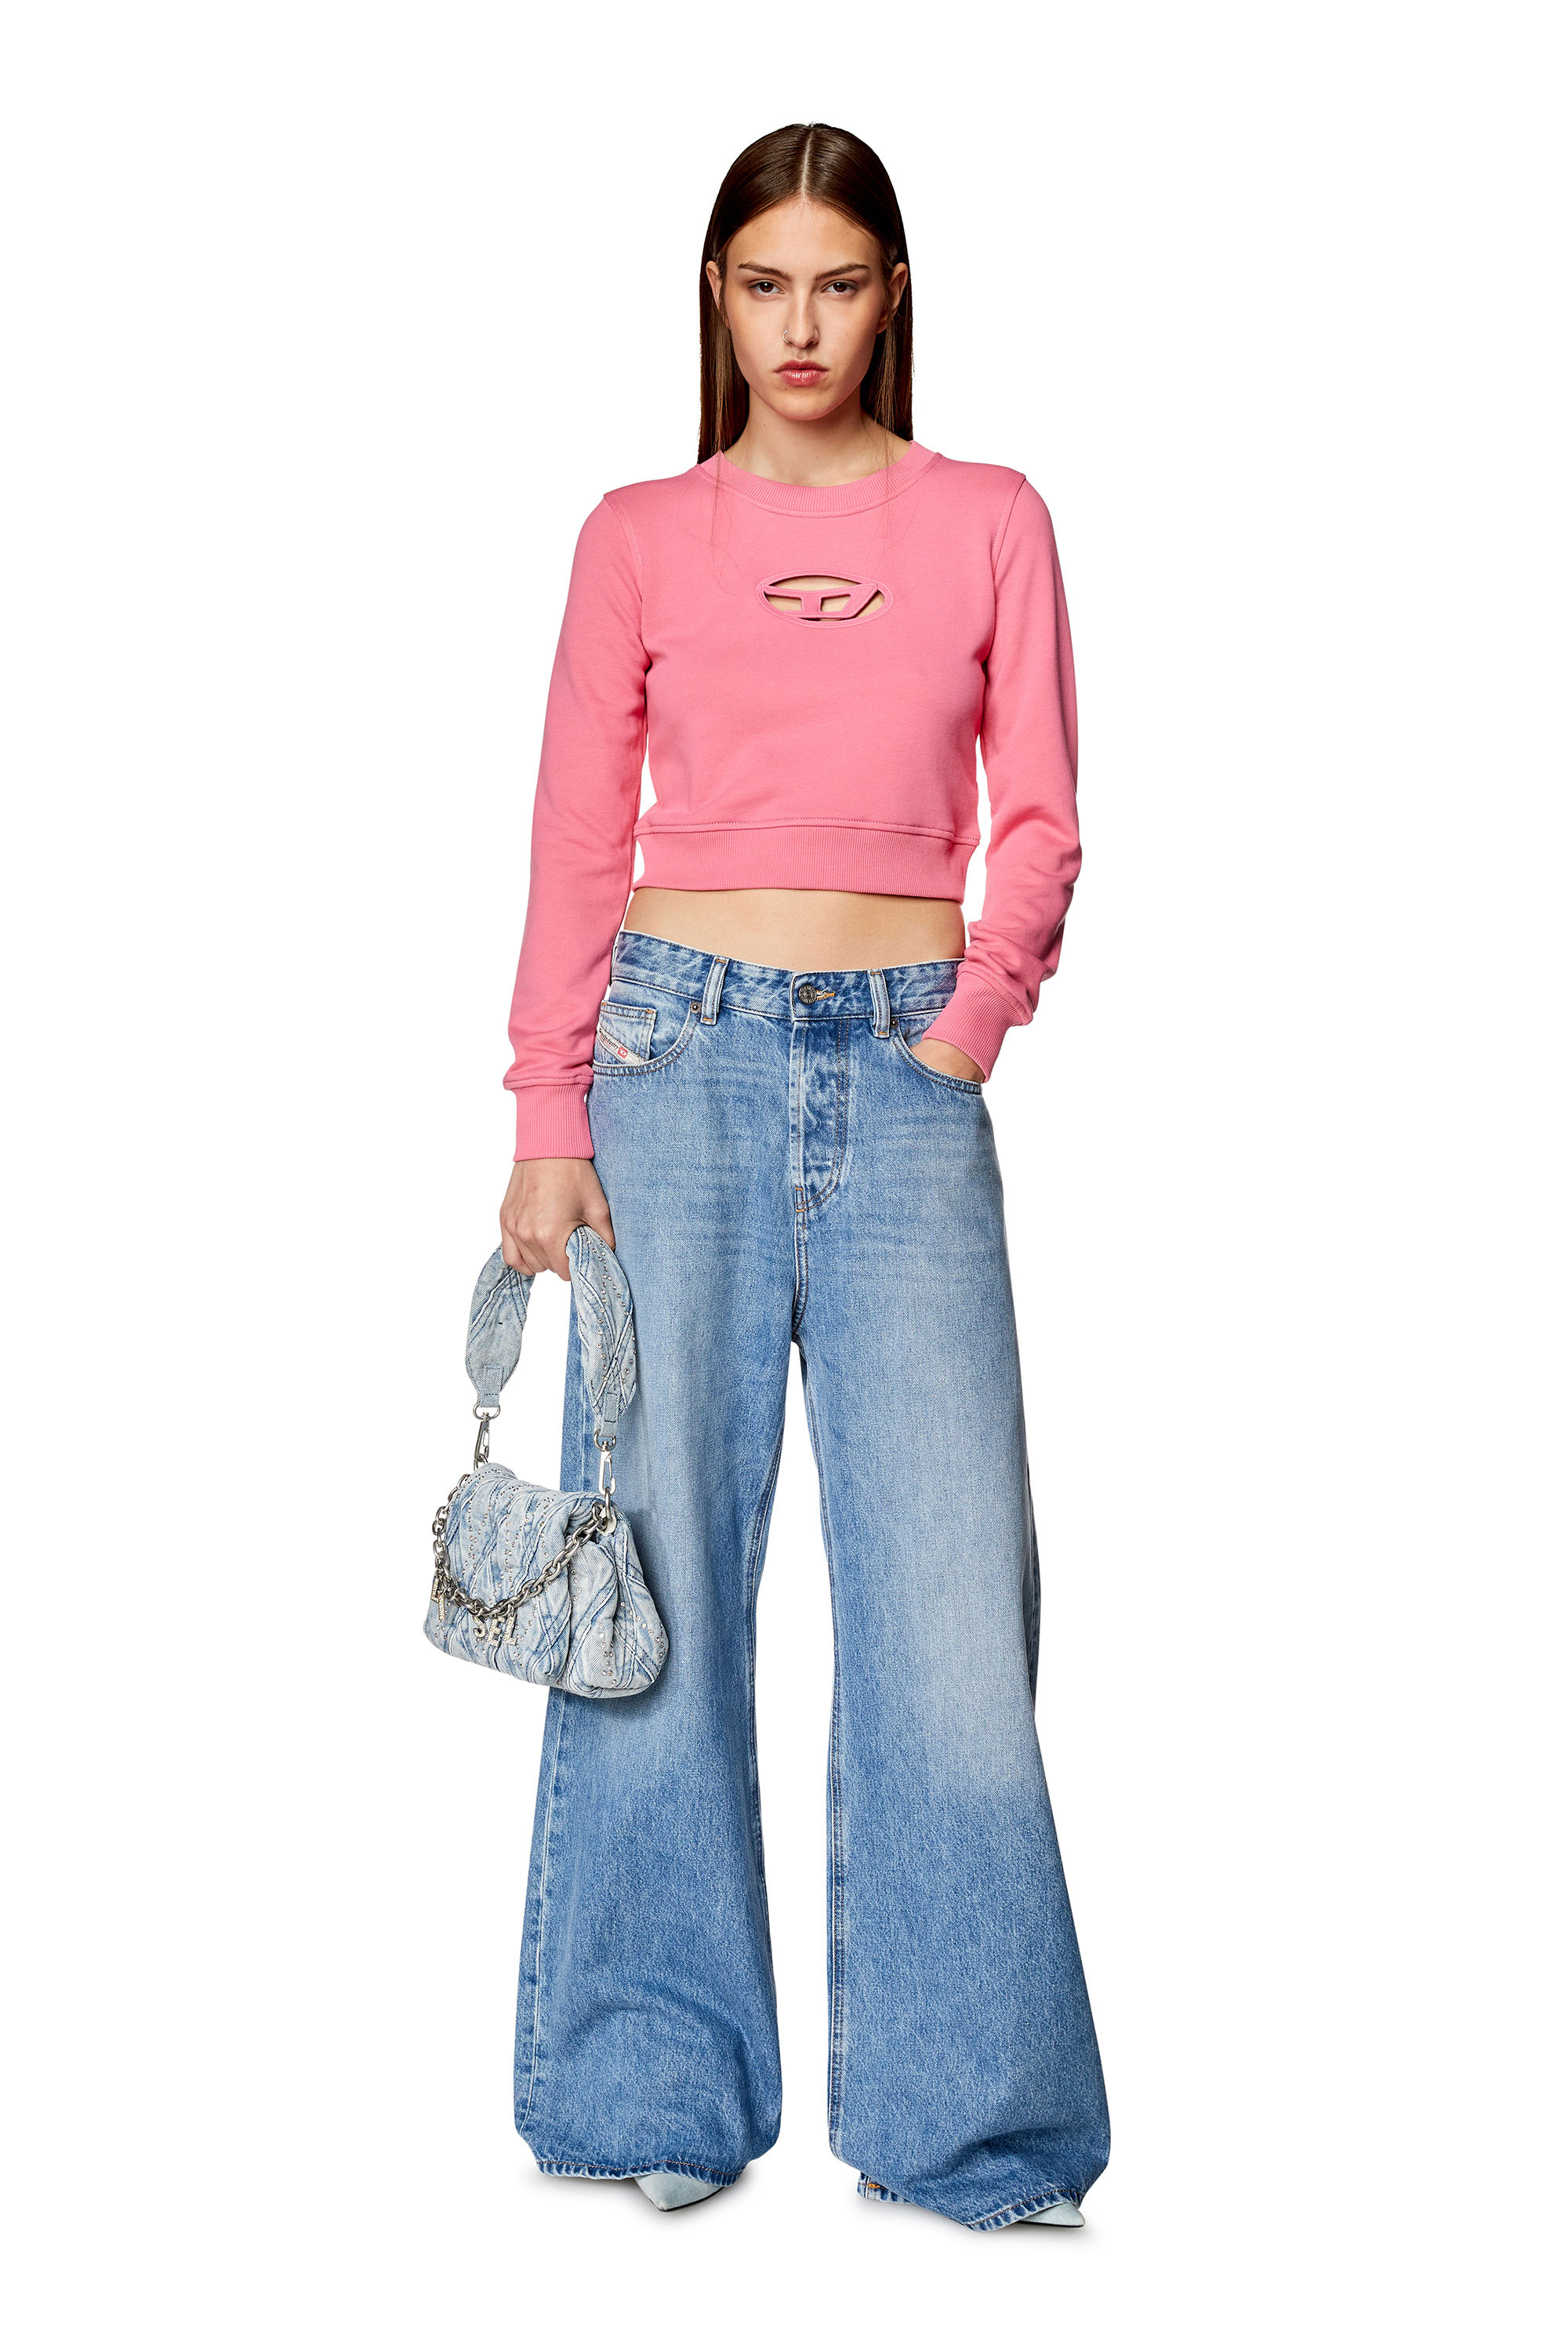 Diesel - F-SLIMMY-OD, Woman Cropped sweatshirt with cut-out logo in Pink - Image 2